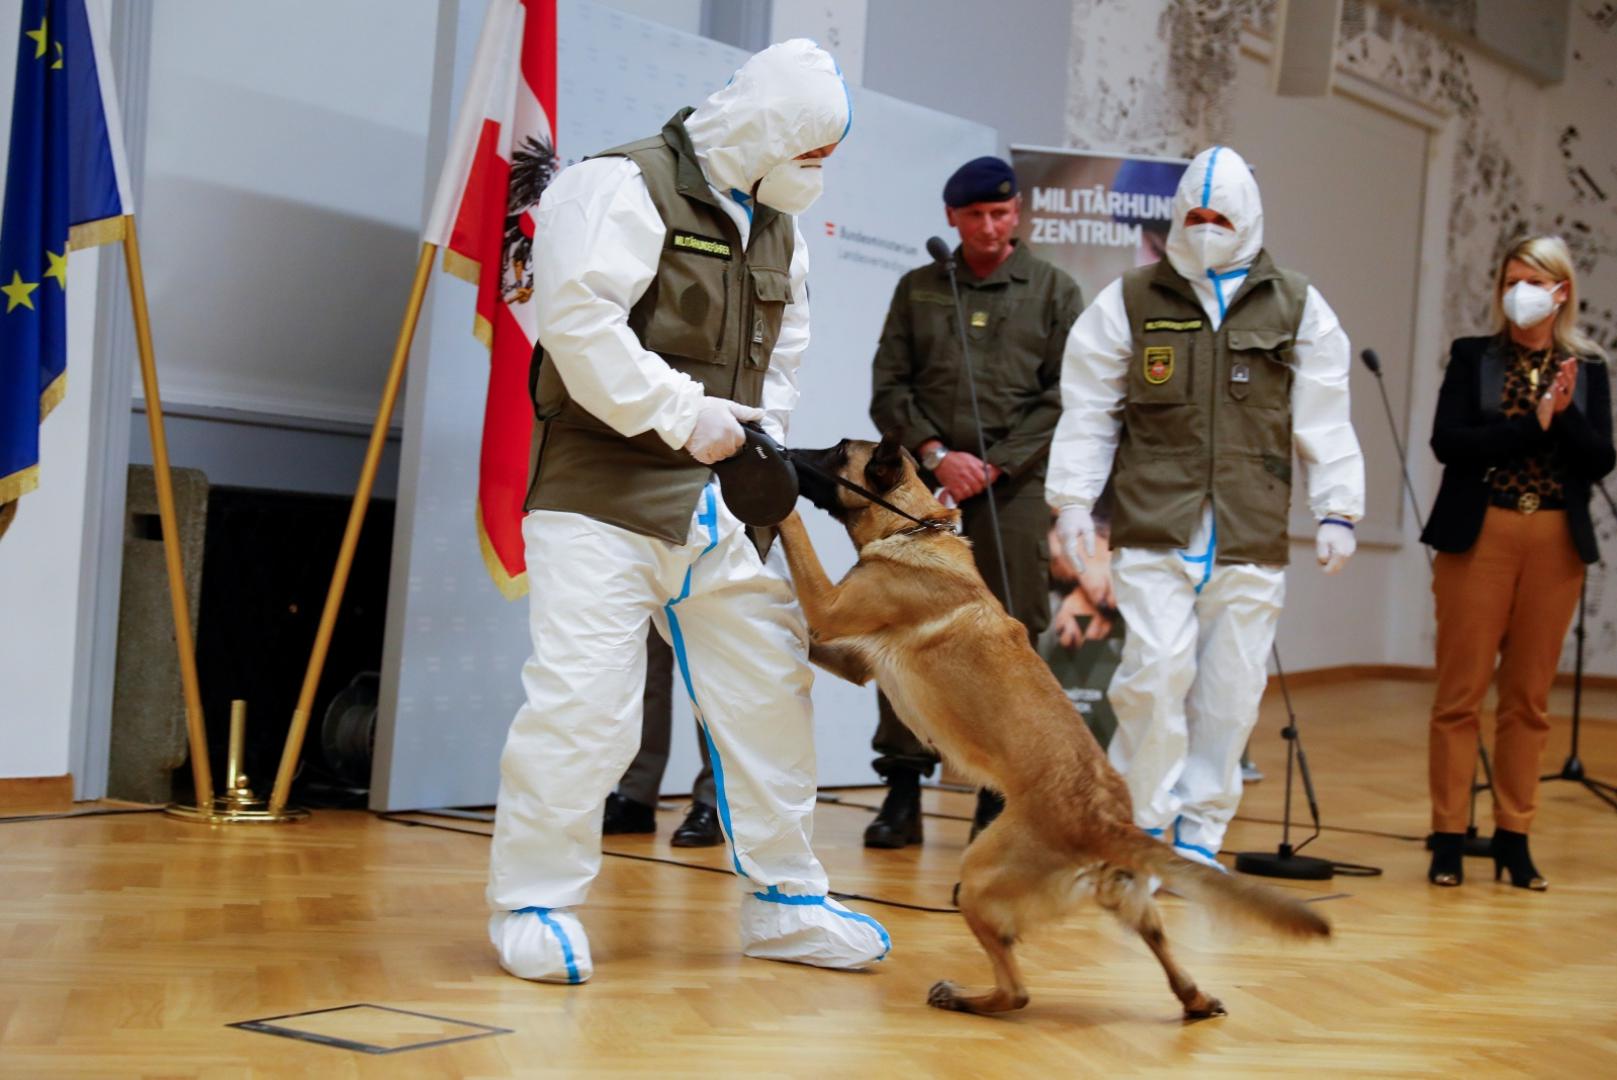 Presentation of Fantasy, a sniffer dog trained to detect COVID-19, in Vienna Austrian Defence Minister Klaudia Tanner applauds during a presentation of Fantasy, a sniffer dog trained to detect the coronavirus disease (COVID-19) in Vienna, Austria December 14, 2020. REUTERS/Leonhard Foeger LEONHARD FOEGER